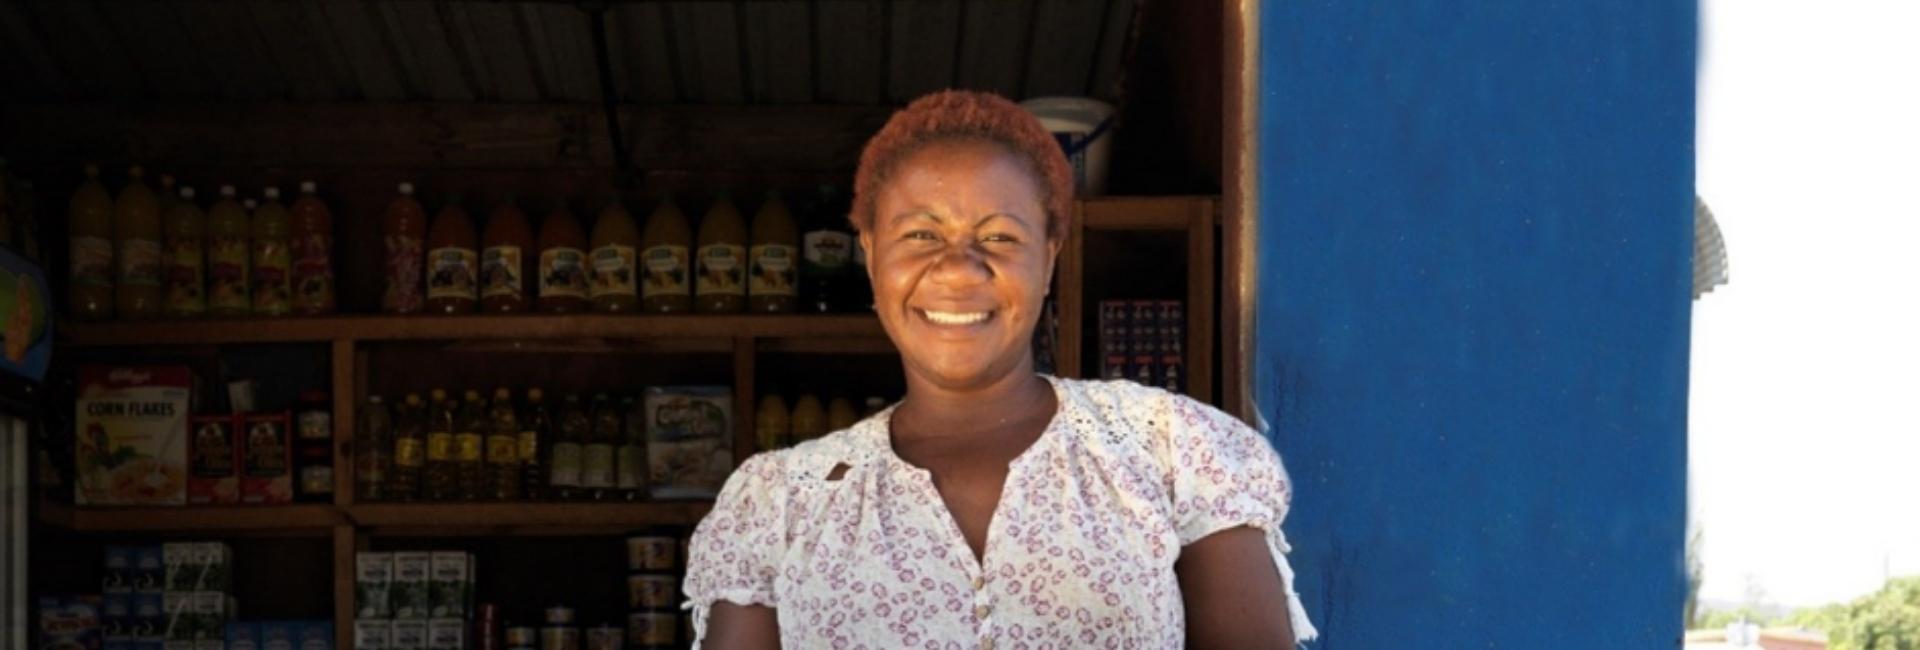 Help a Woman Start a Business in Salima So She Can Provide for Her Family